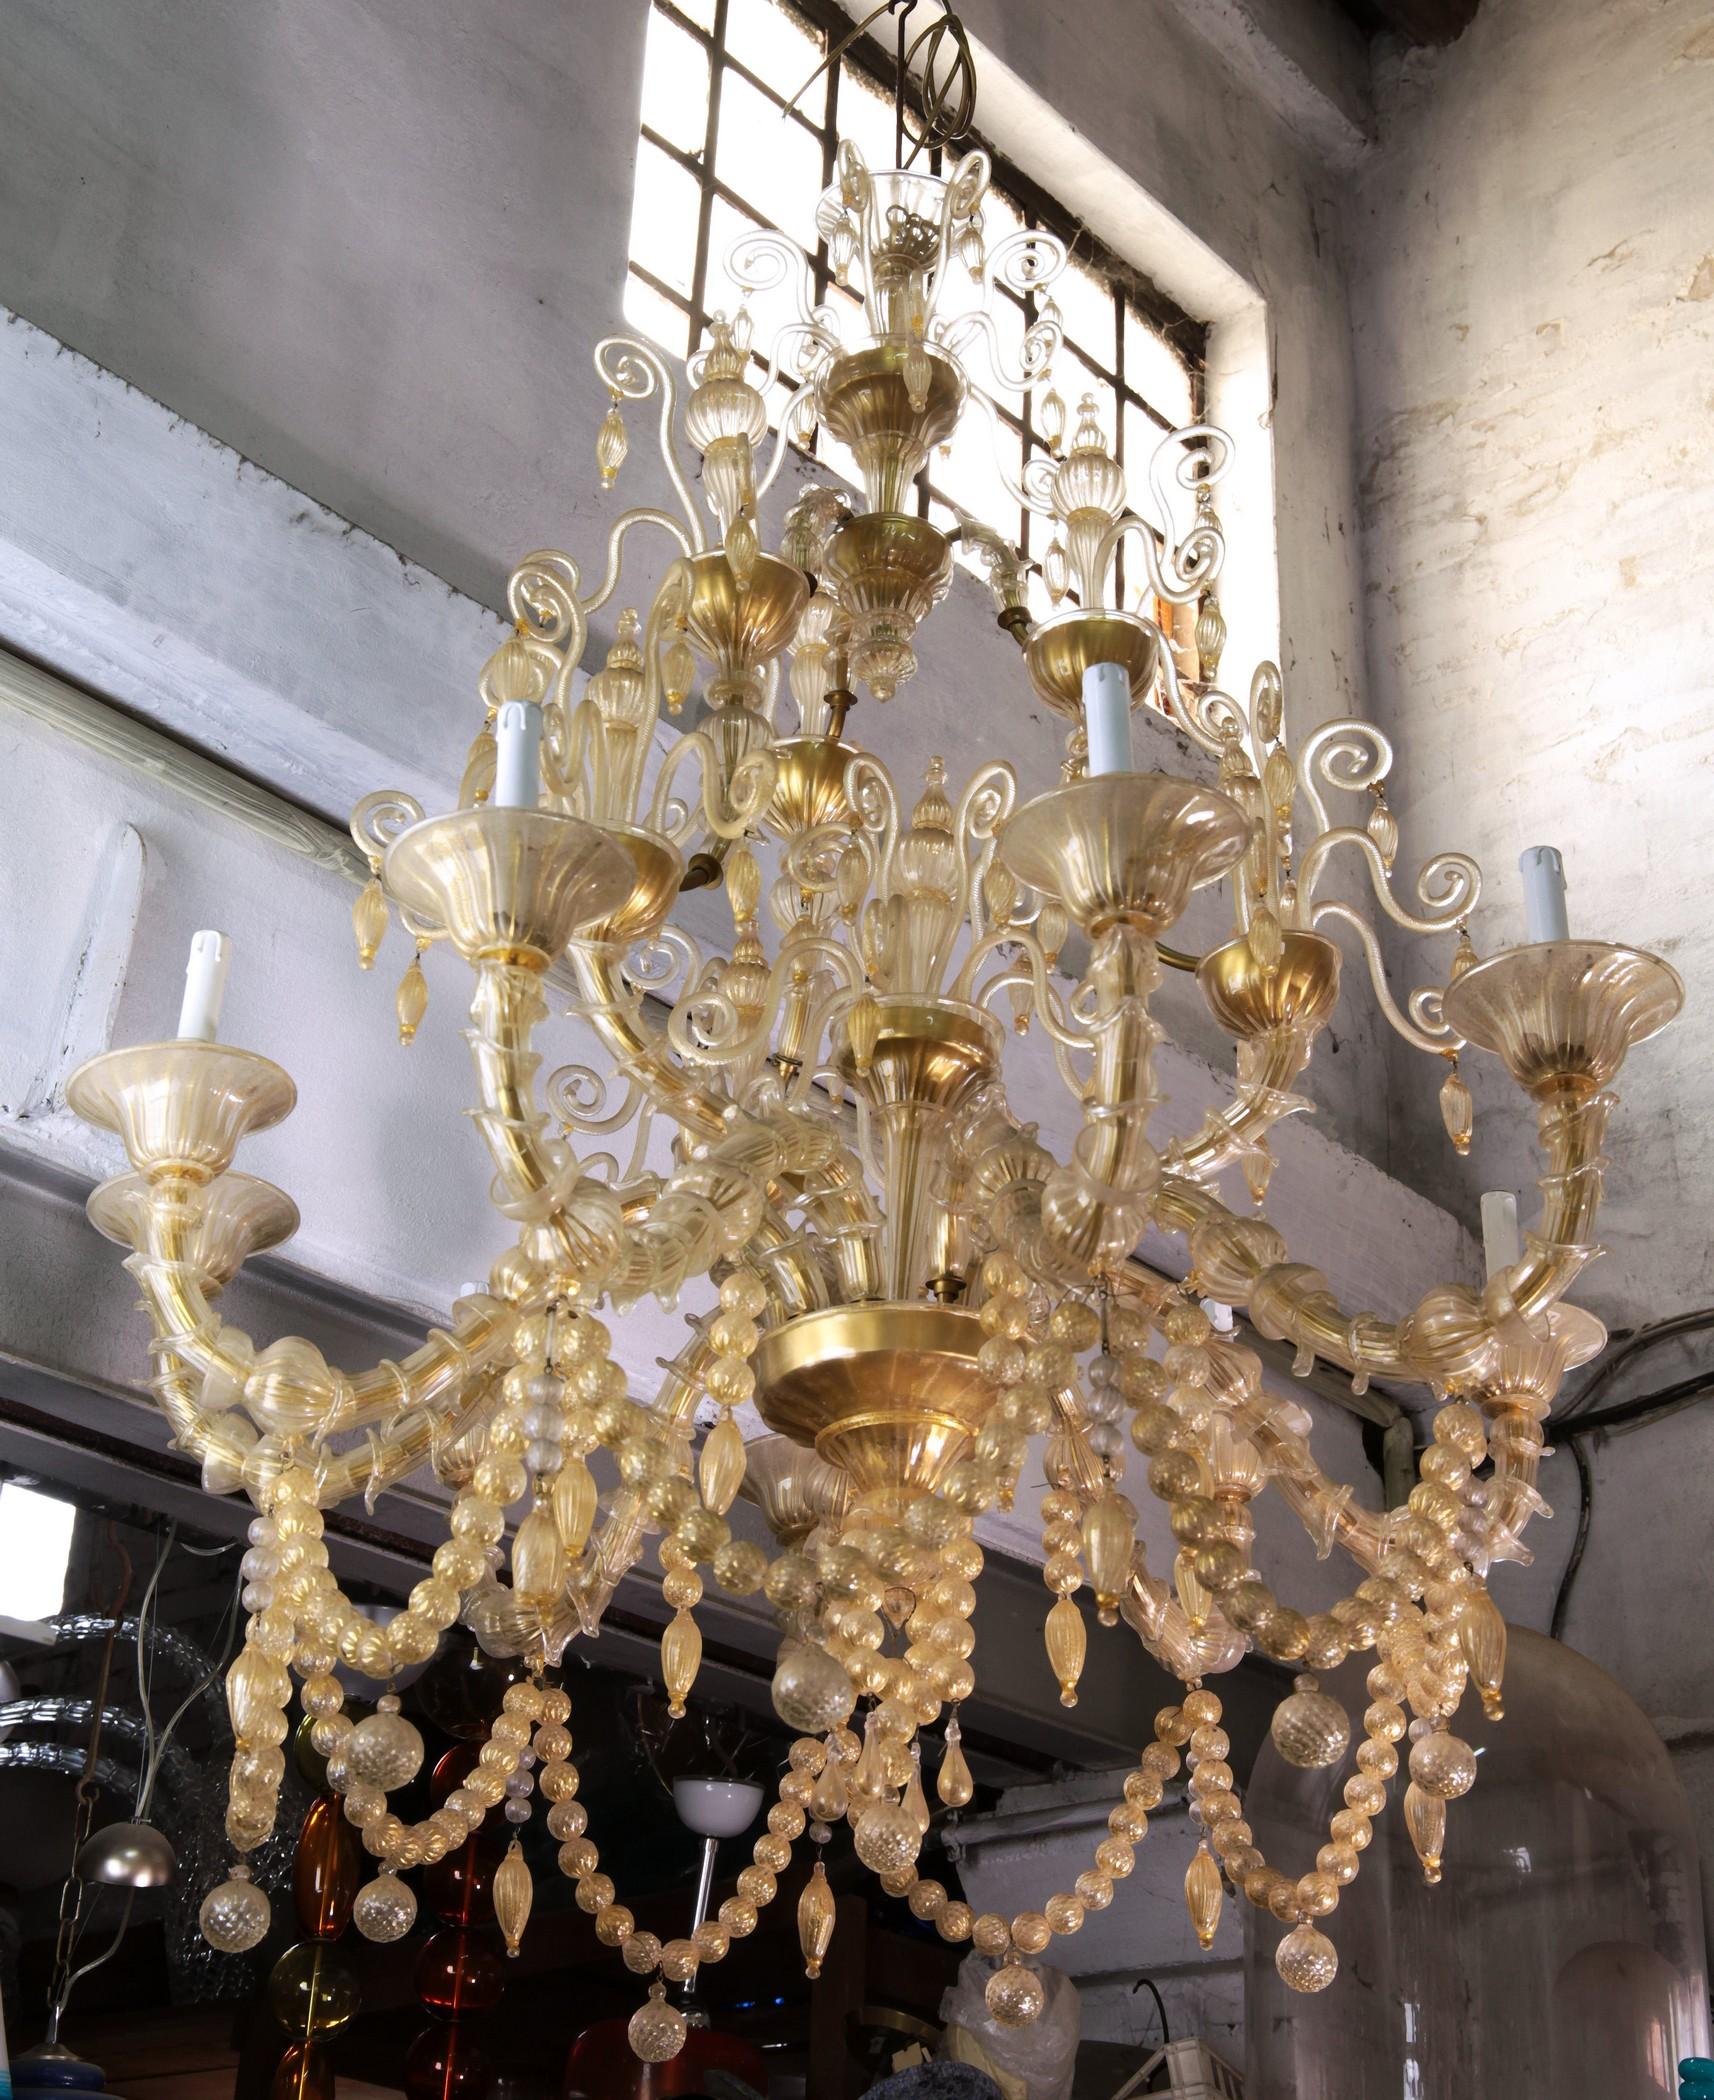 20th Century Cesare Toso Pearl Rezzonico Chandelier 9 Arms All in Gold Leaf over Clear, 1980s